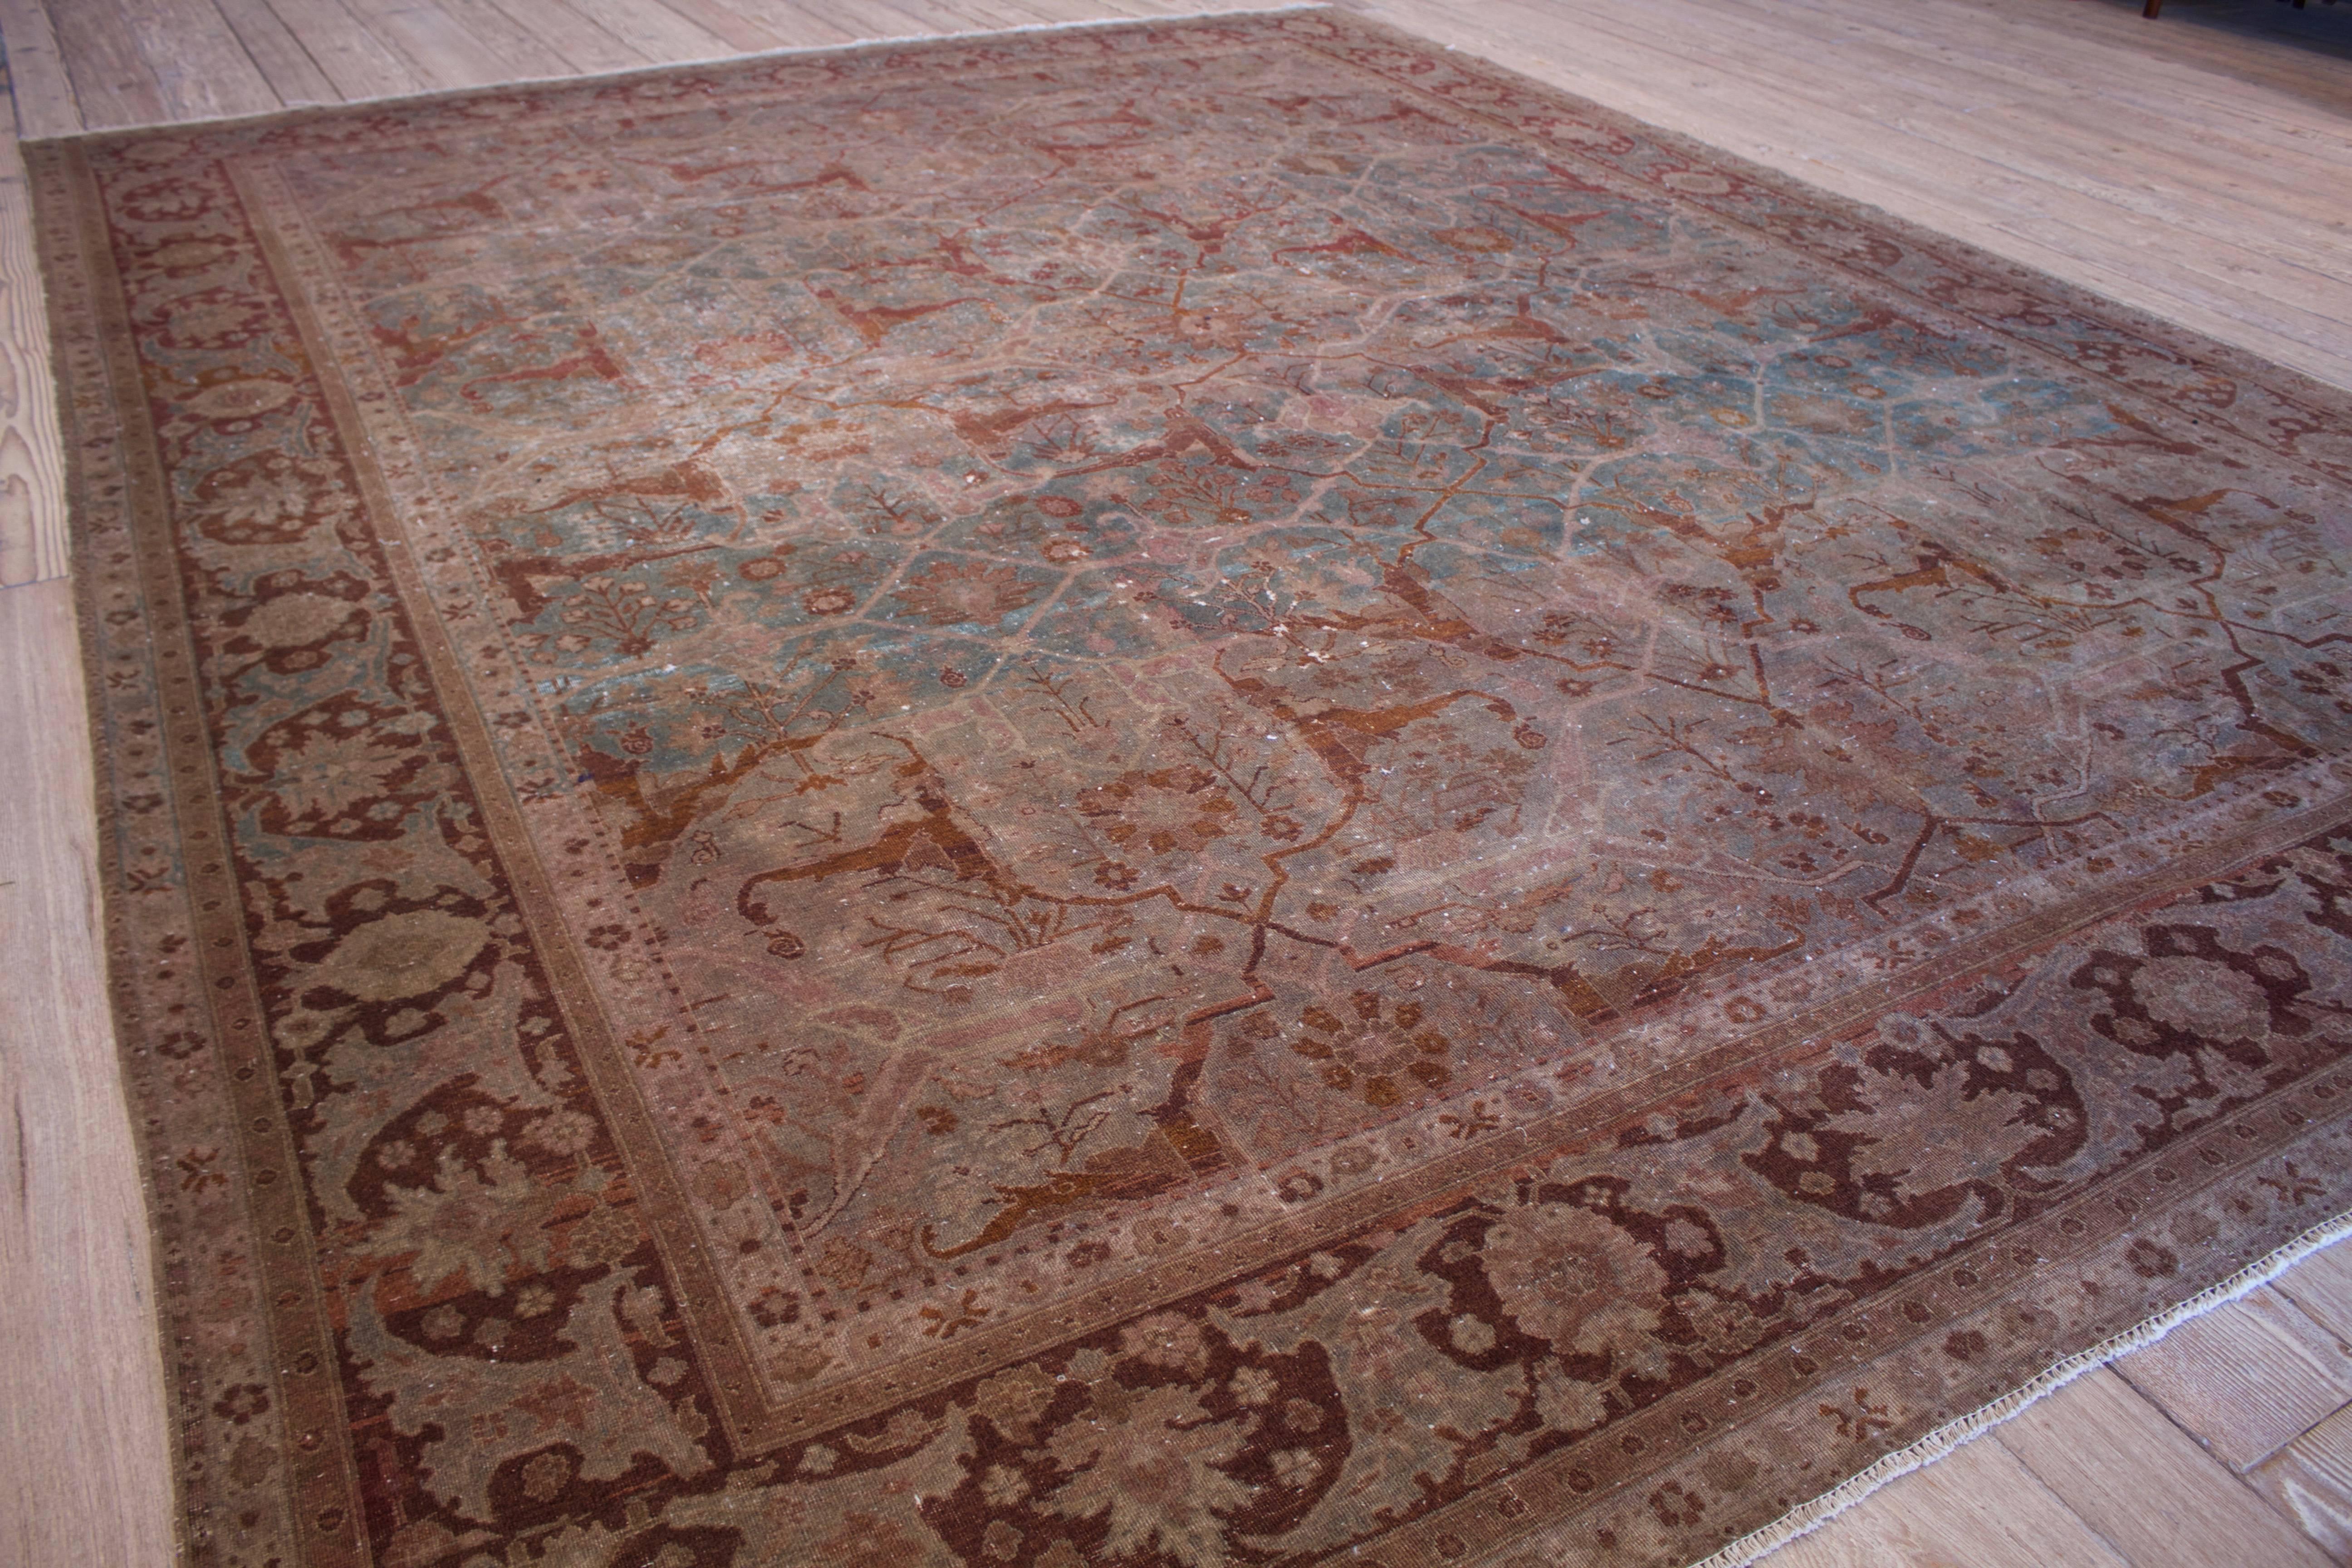 Distressed green and red antique Agra rug. This is an all-over antique Agra with garden imagery. Measures: 10'10" x 14'.